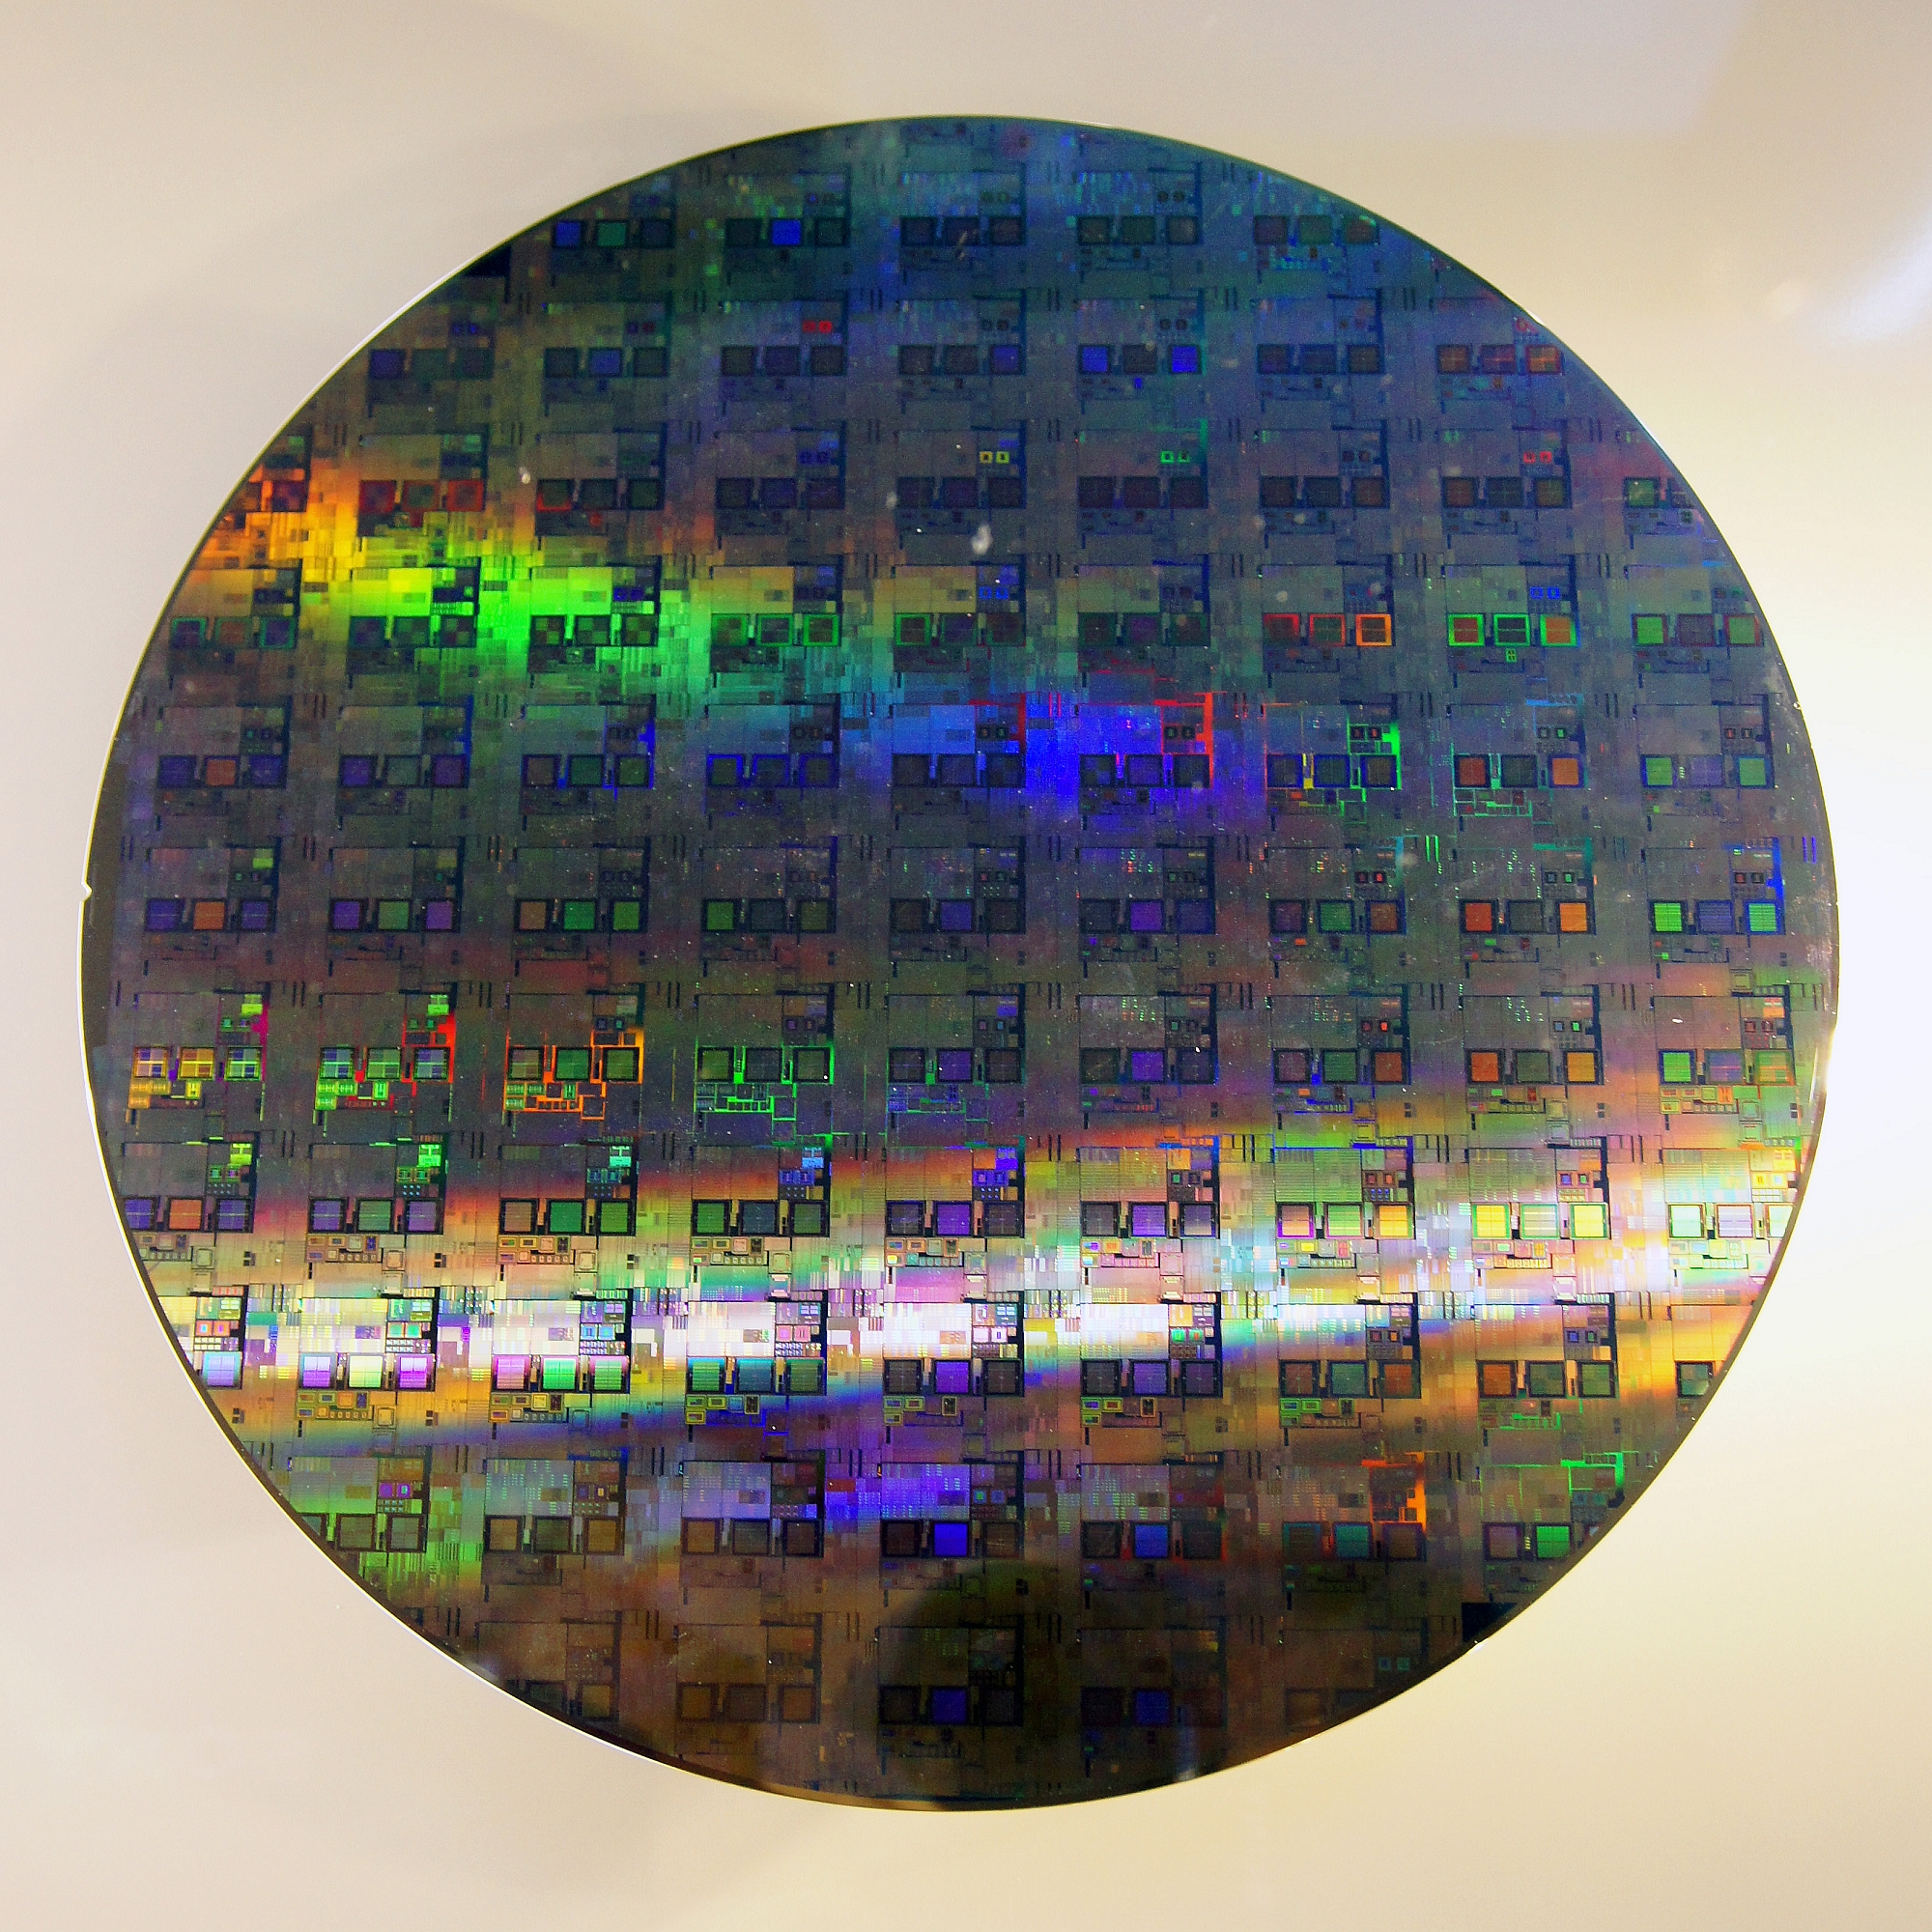 12-inch silicon wafer